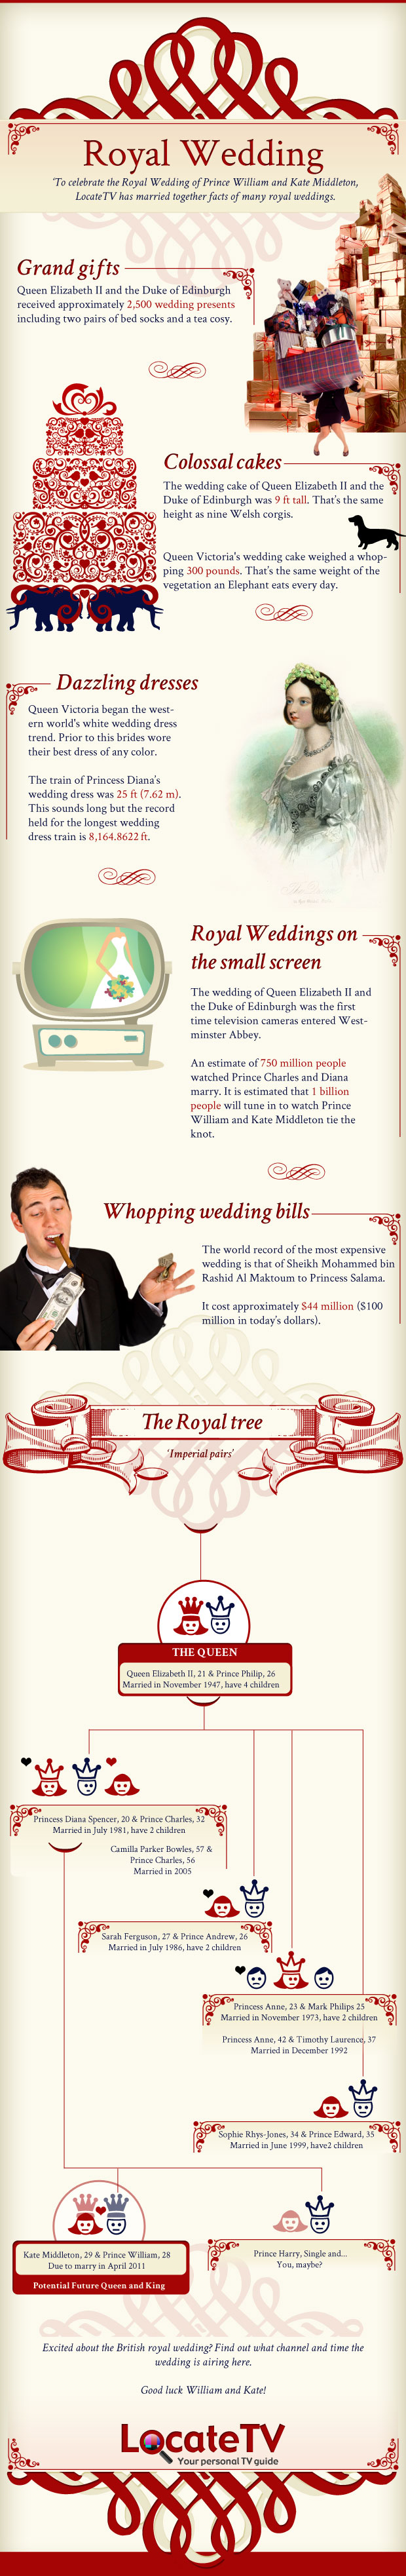 Imperial Royal Wedding Facts Infographic